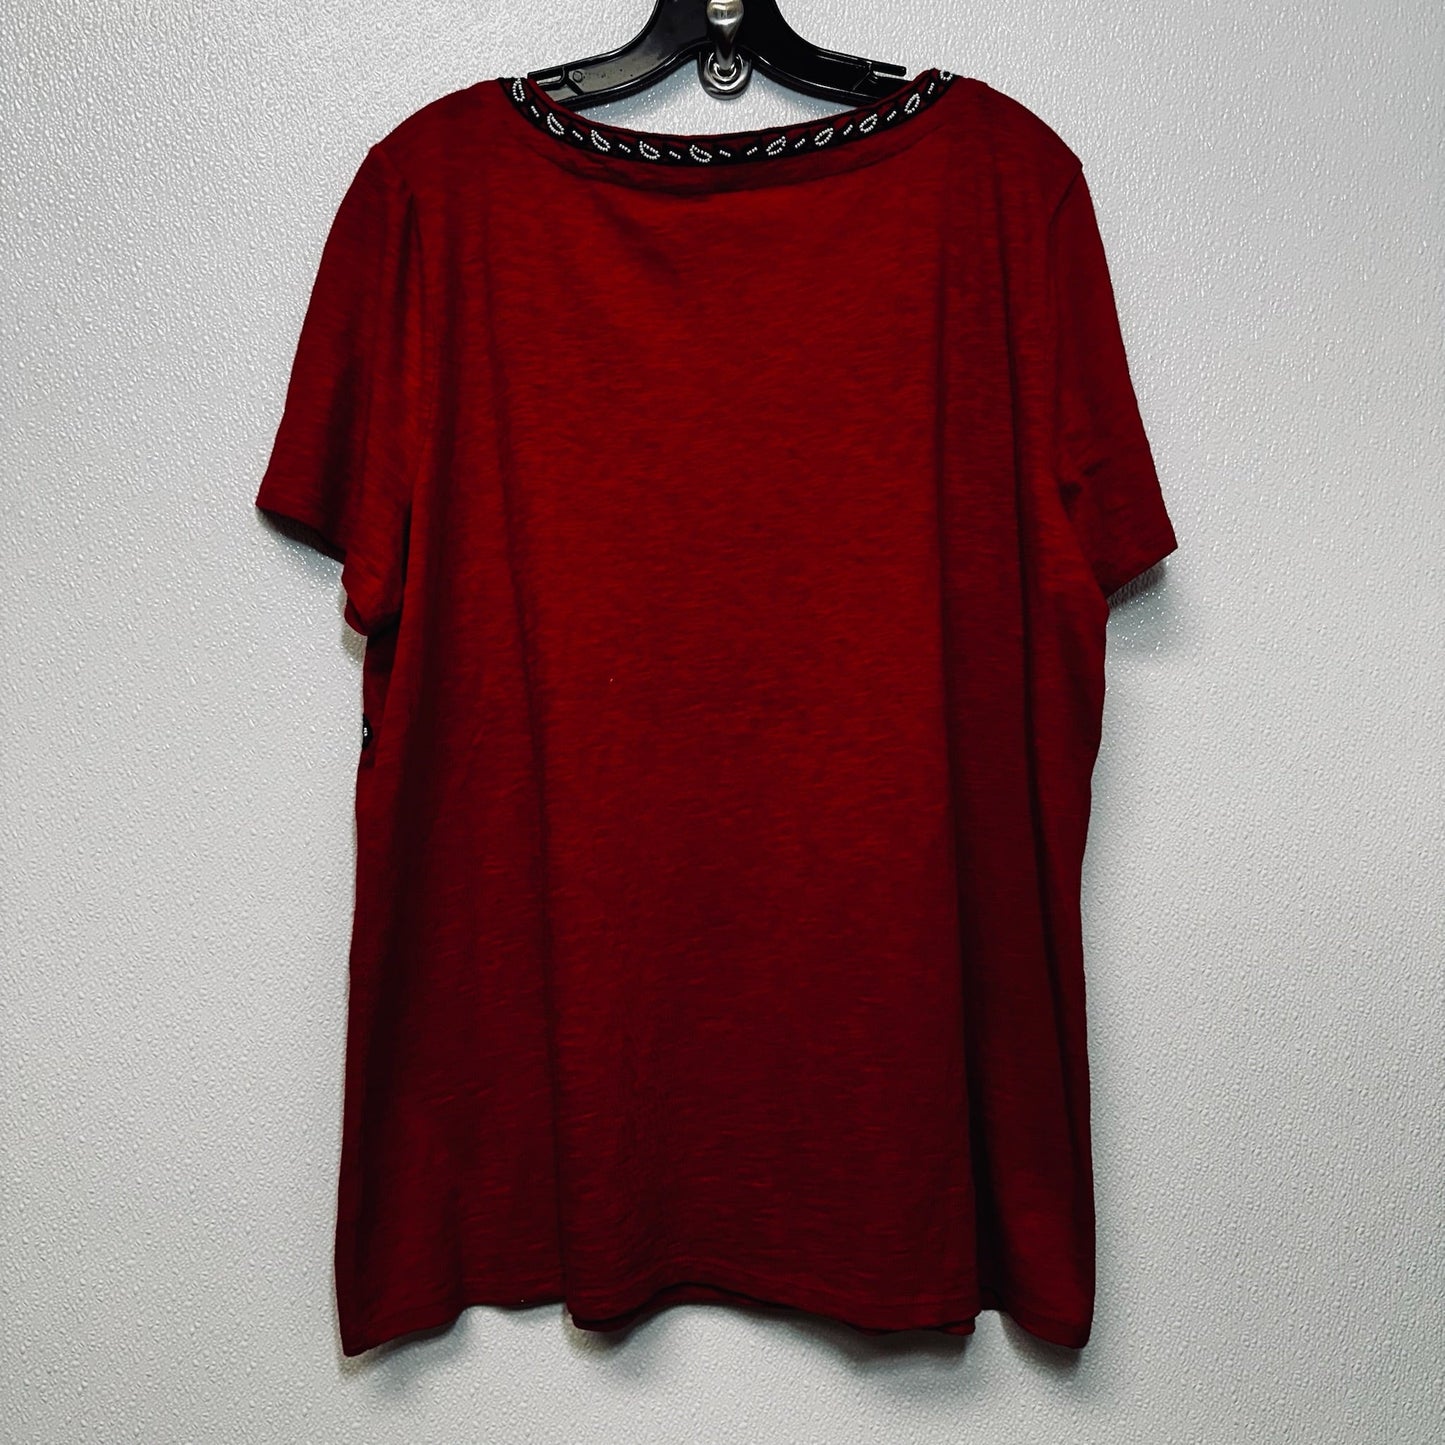 Red Top Short Sleeve Basic Talbots O, Size 1x